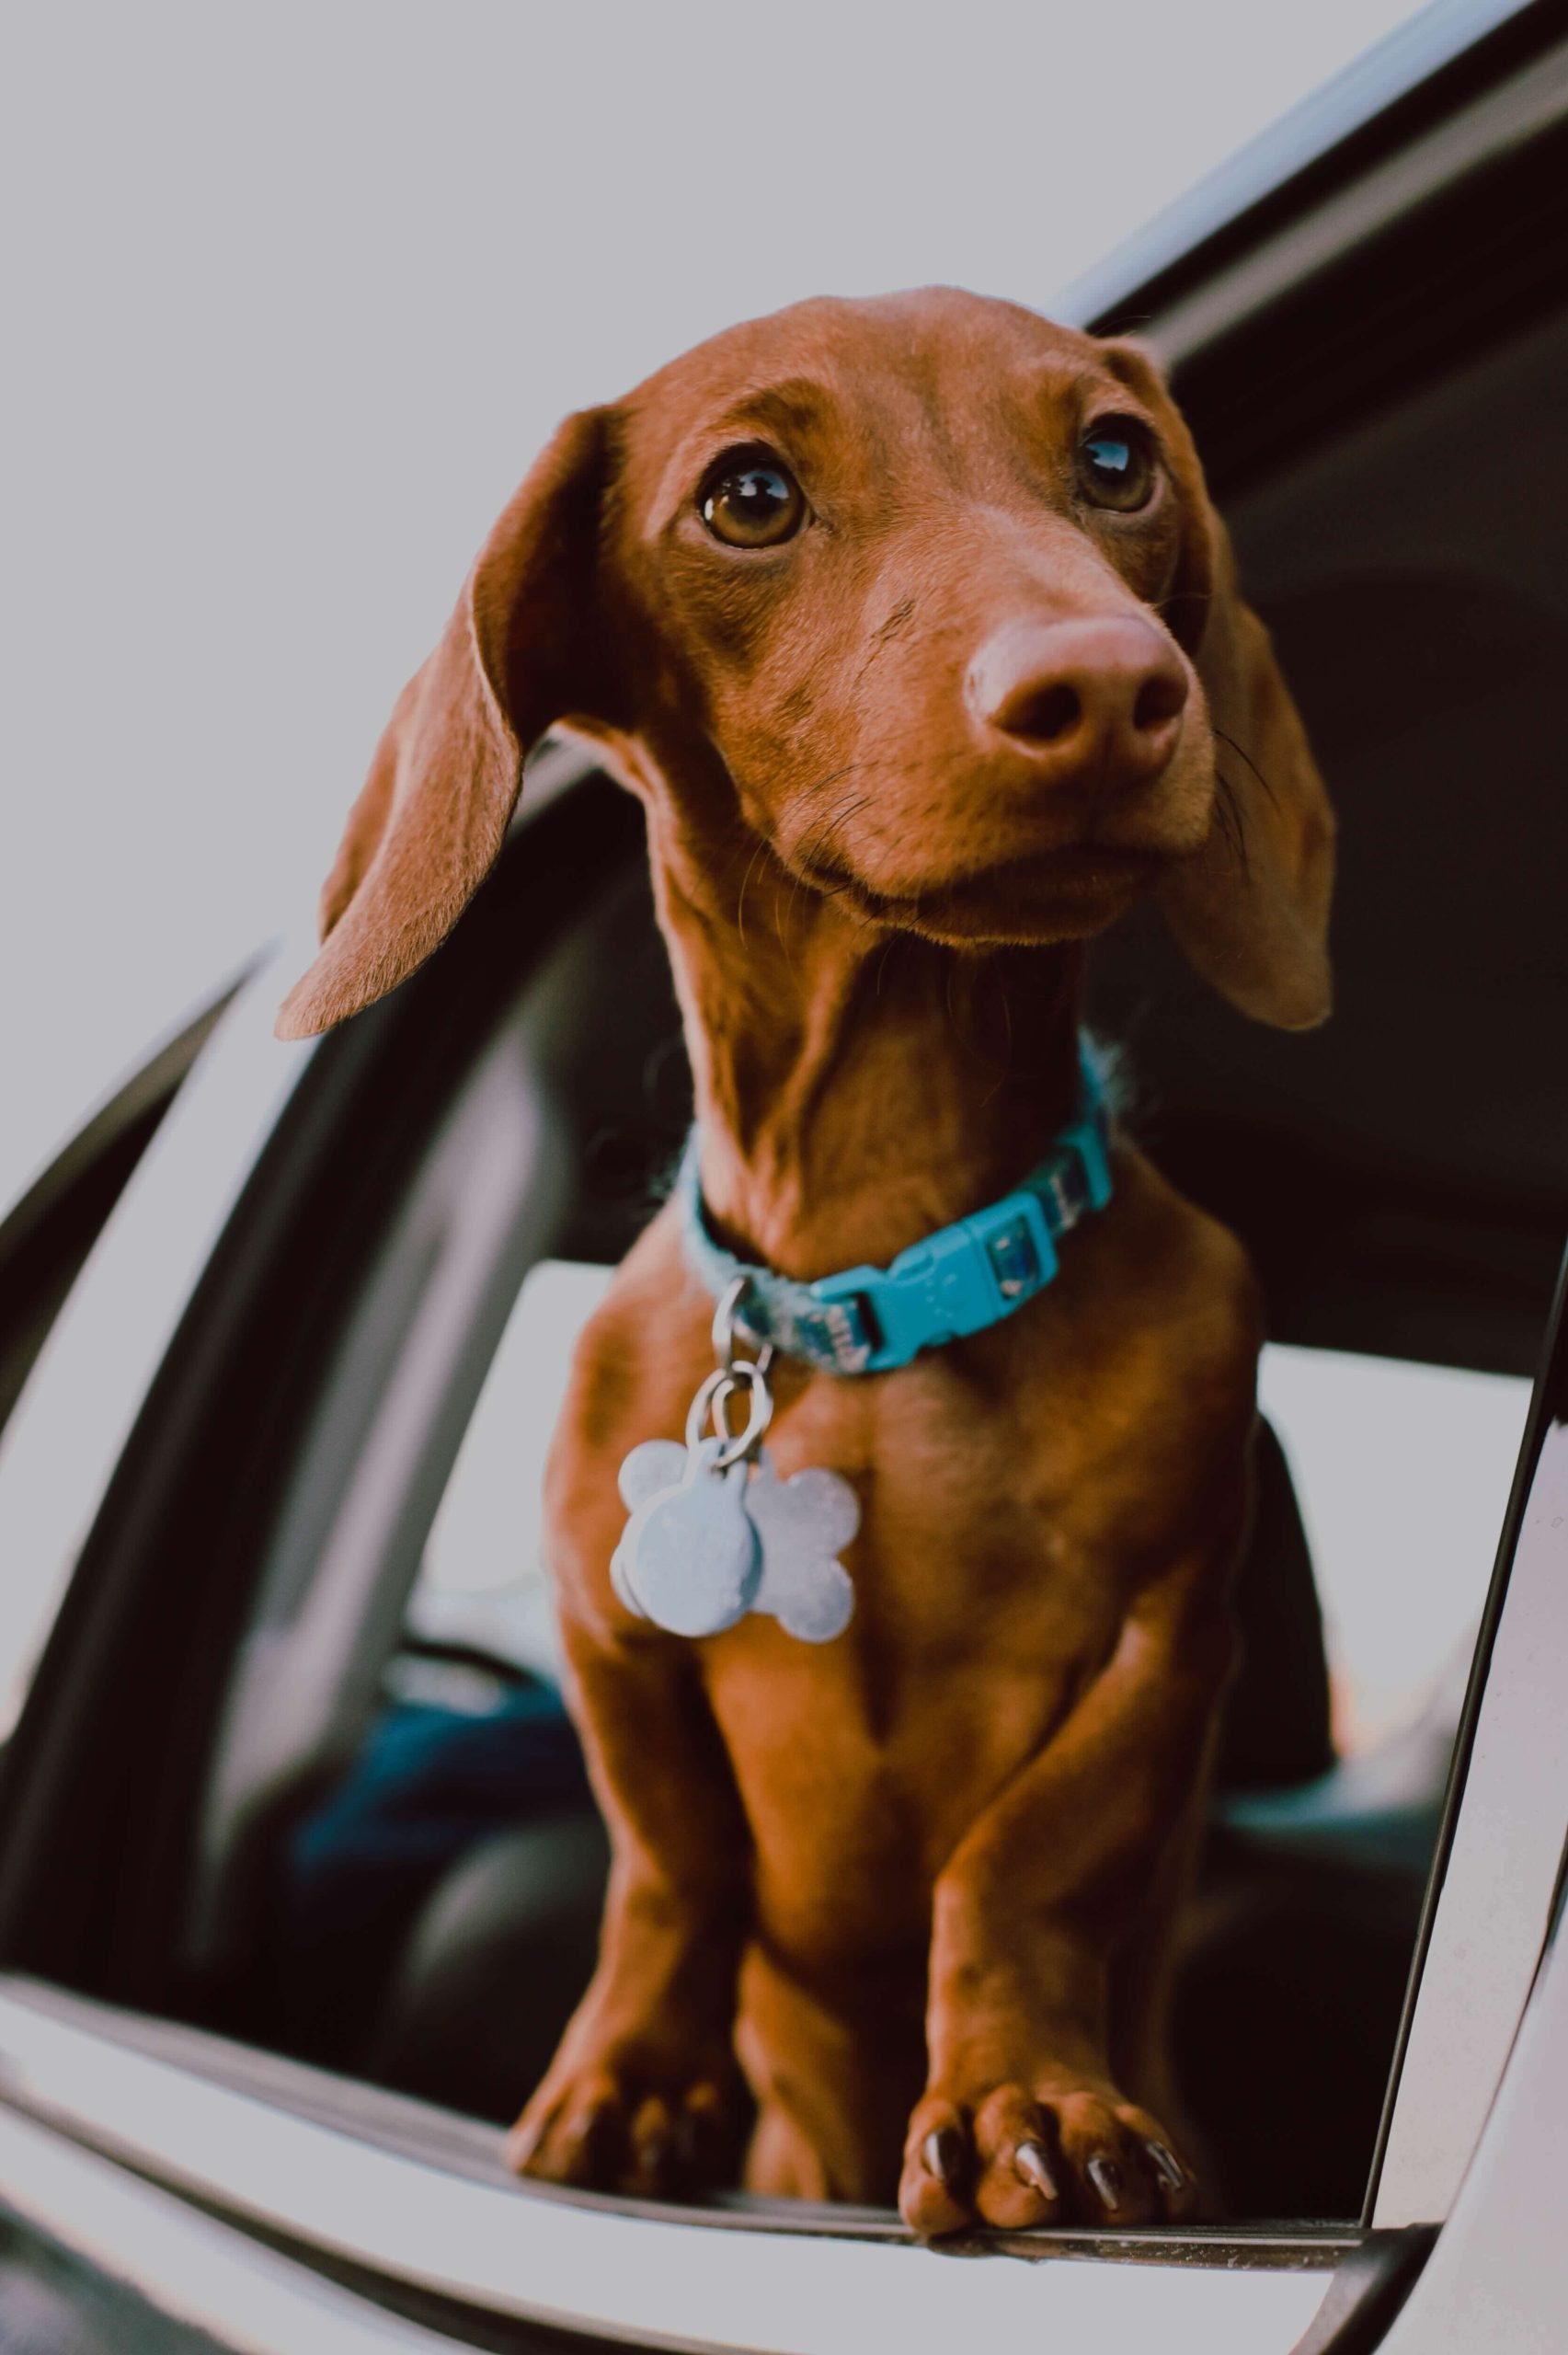 When do you need to see a vet about your dachshund’s stomach issues?